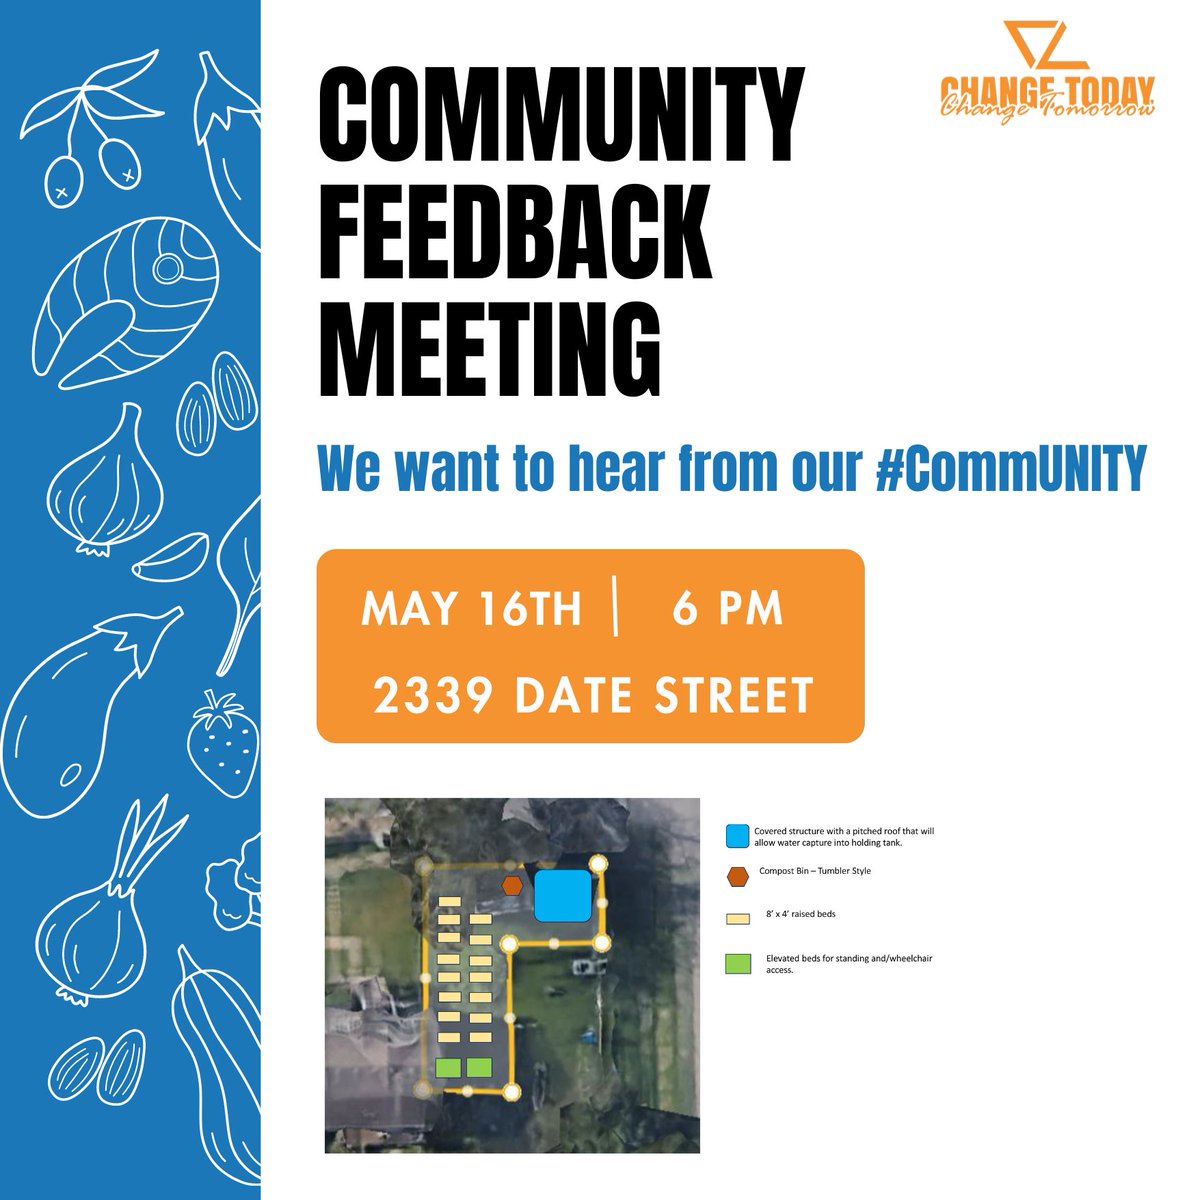 Change Tomorrow, Change Today is preparing a farmers market and we want it to meet YOUR needs. Join us on May 16th at 6 PM for a Community Feedback Meeting at 2339 Date St. Let's work together to create a market tailored just for you and make tomorrow better than today!